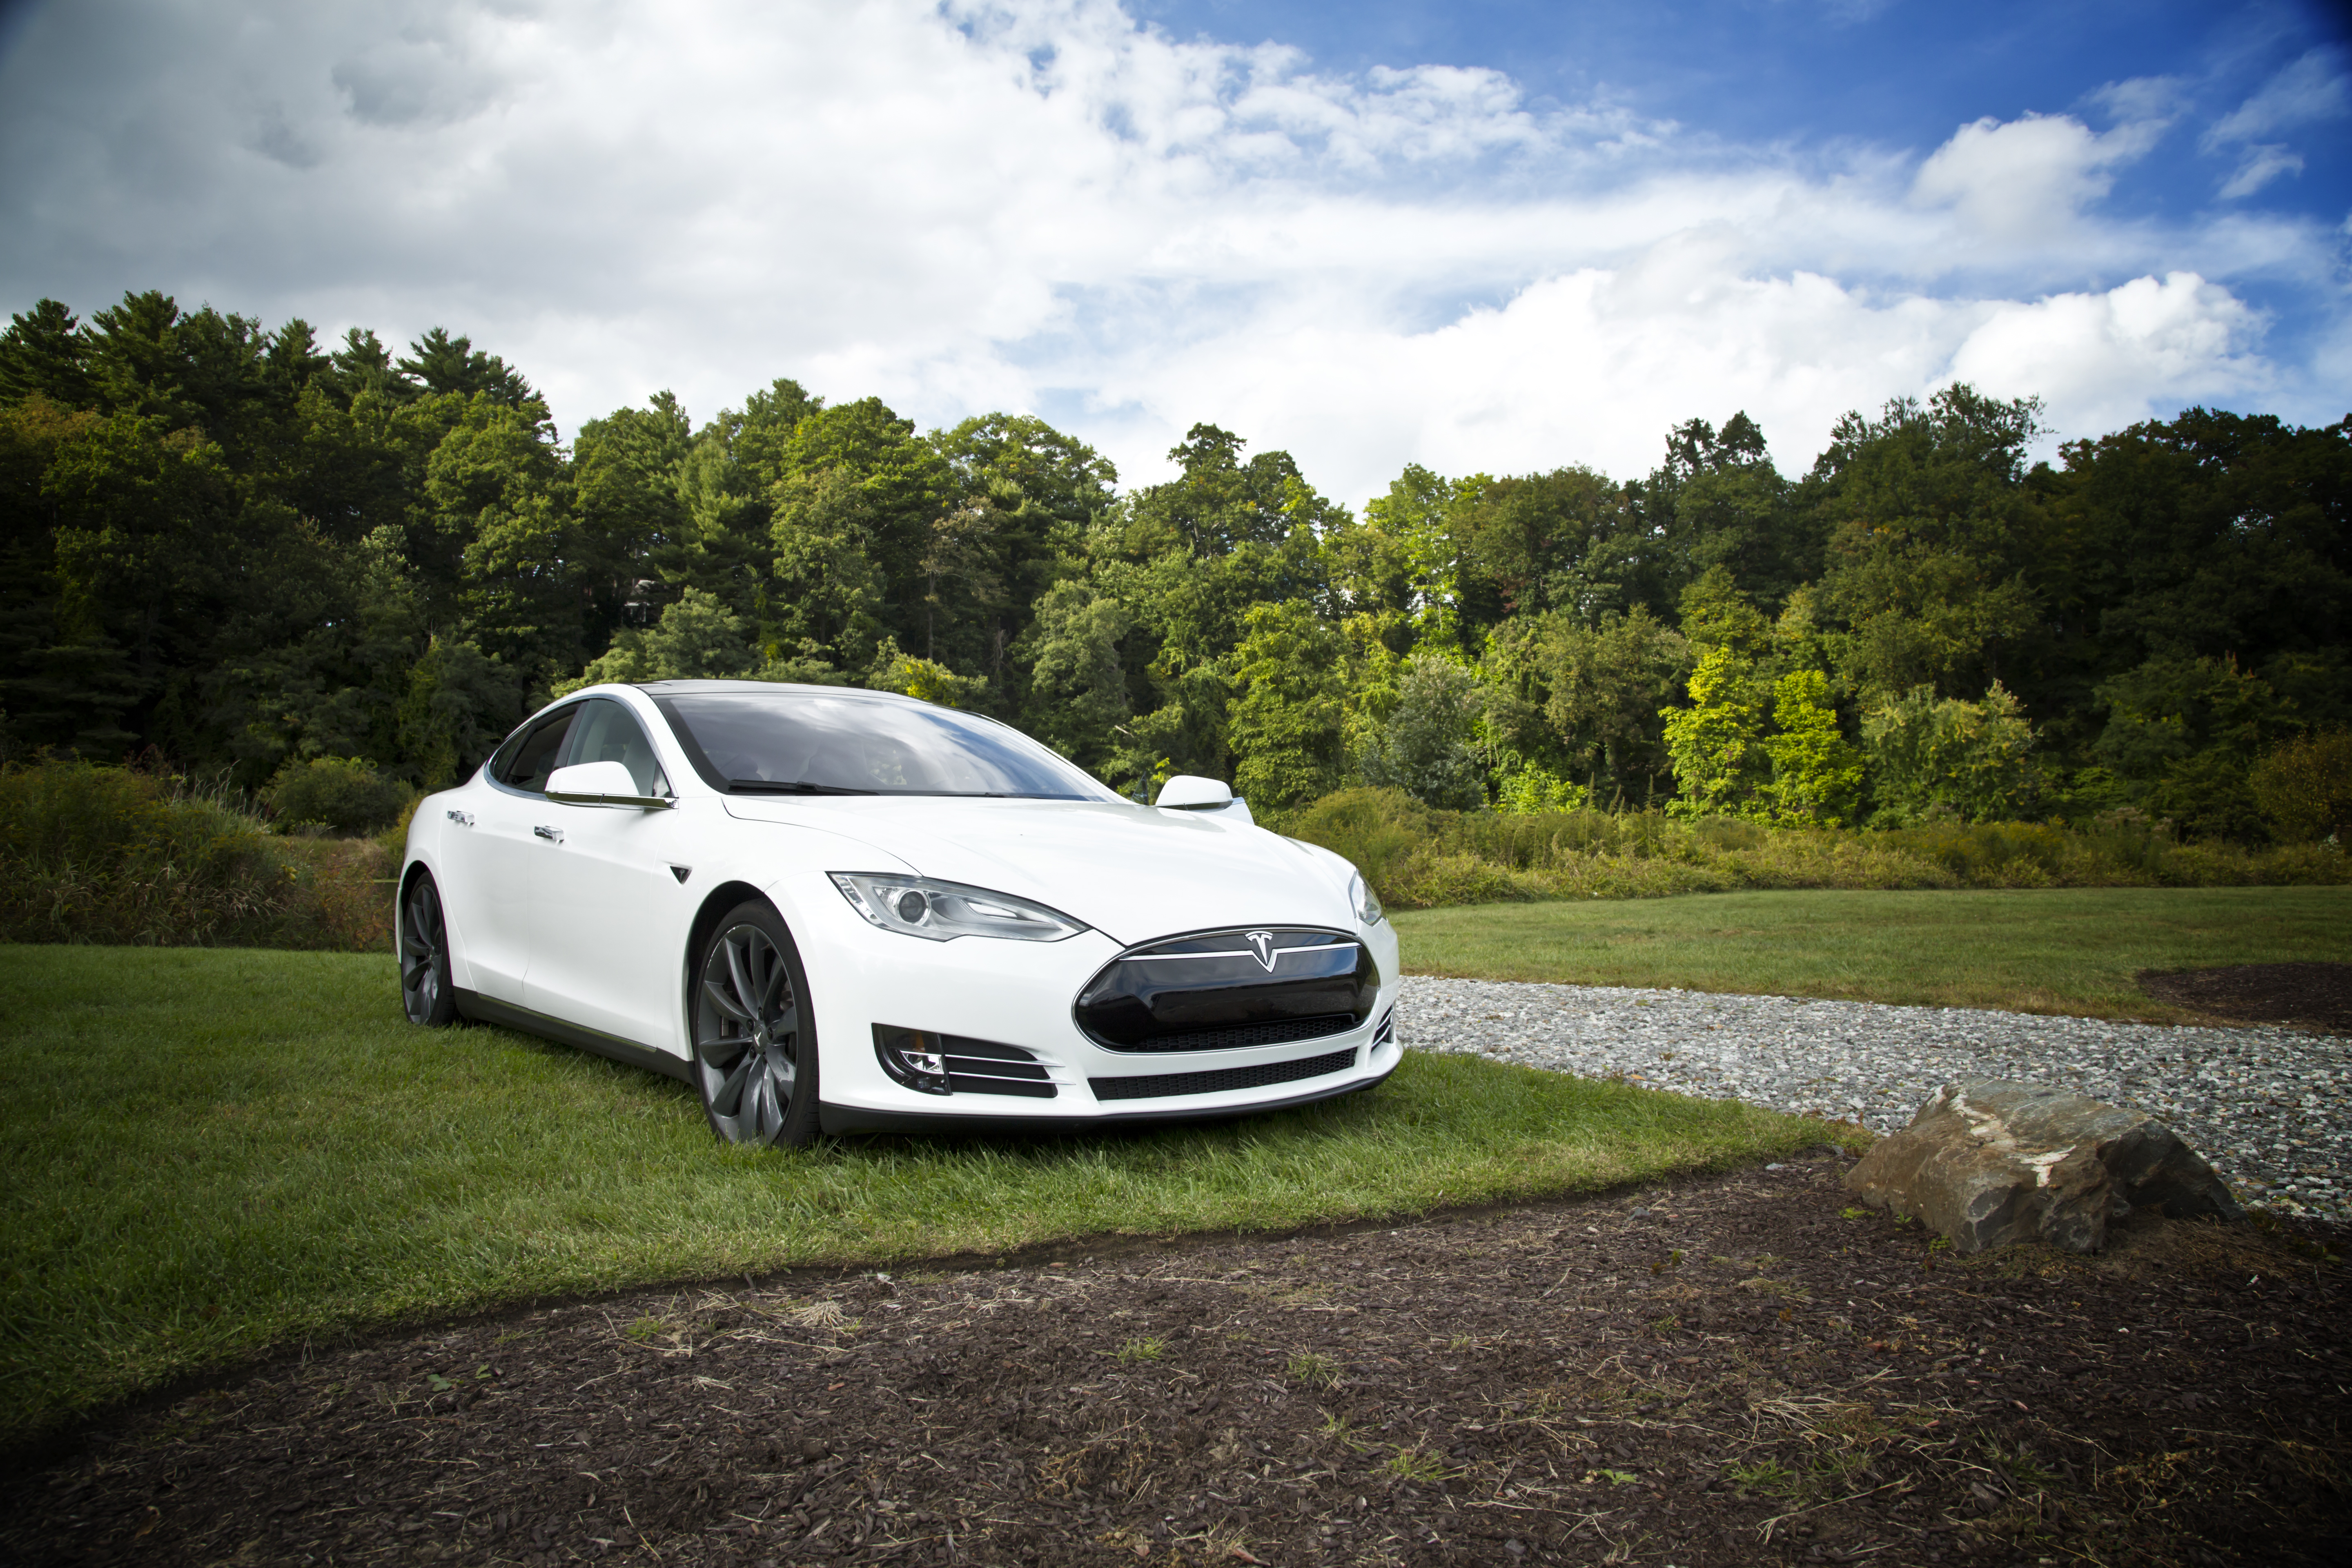 The Tesla Model S Could Be About To Cross A Crucial Electric